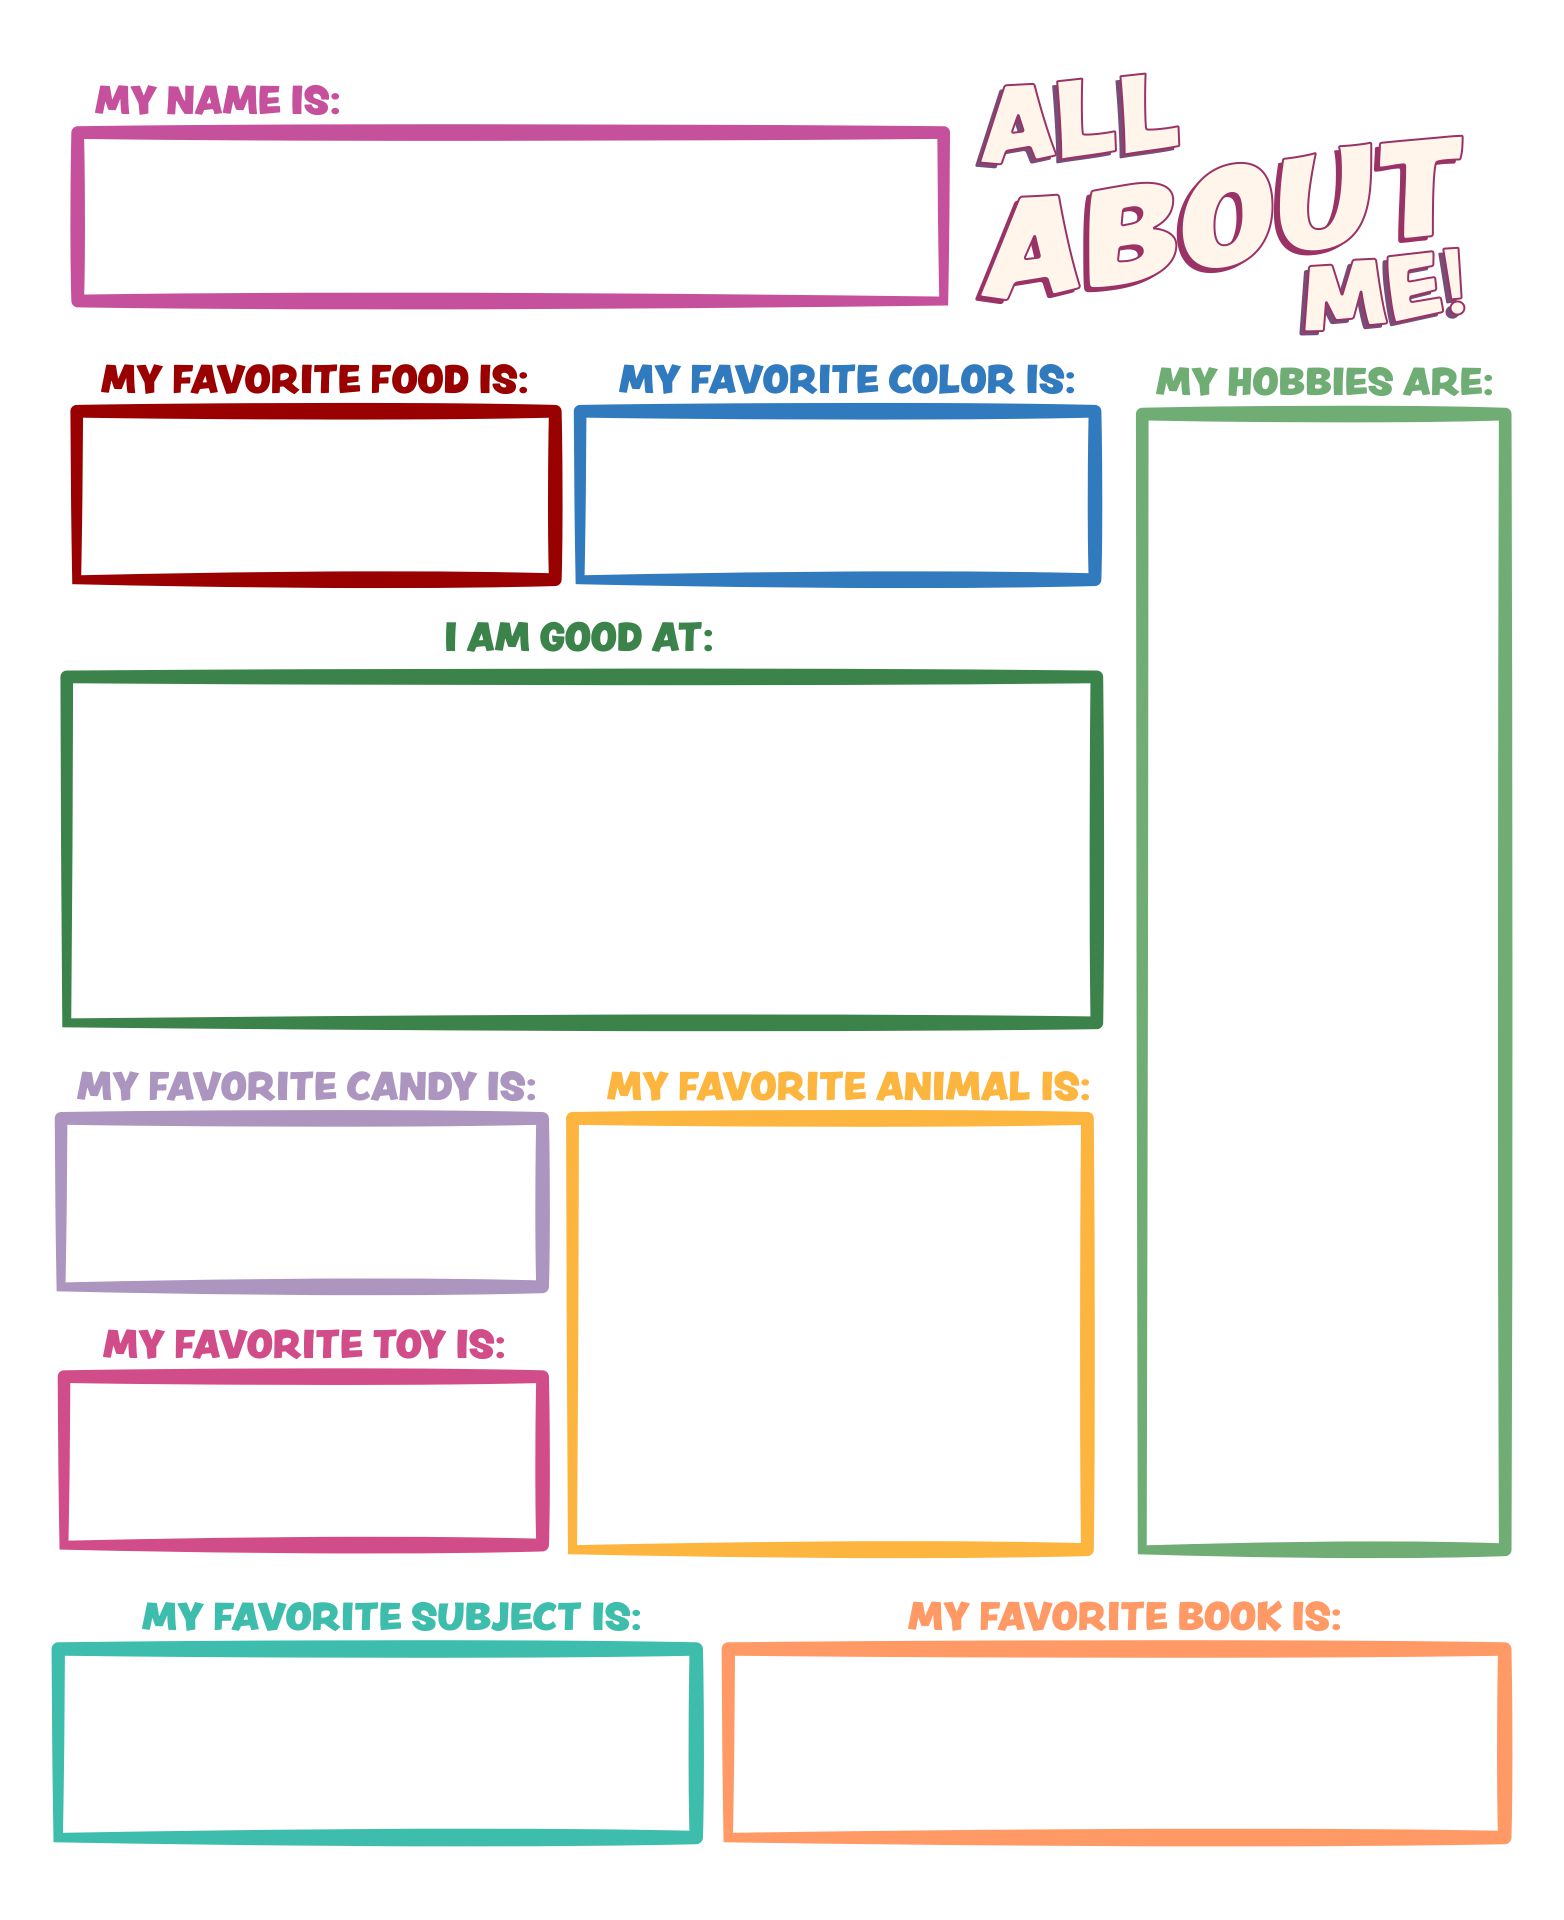 All About Me Worksheet Printable Middle School